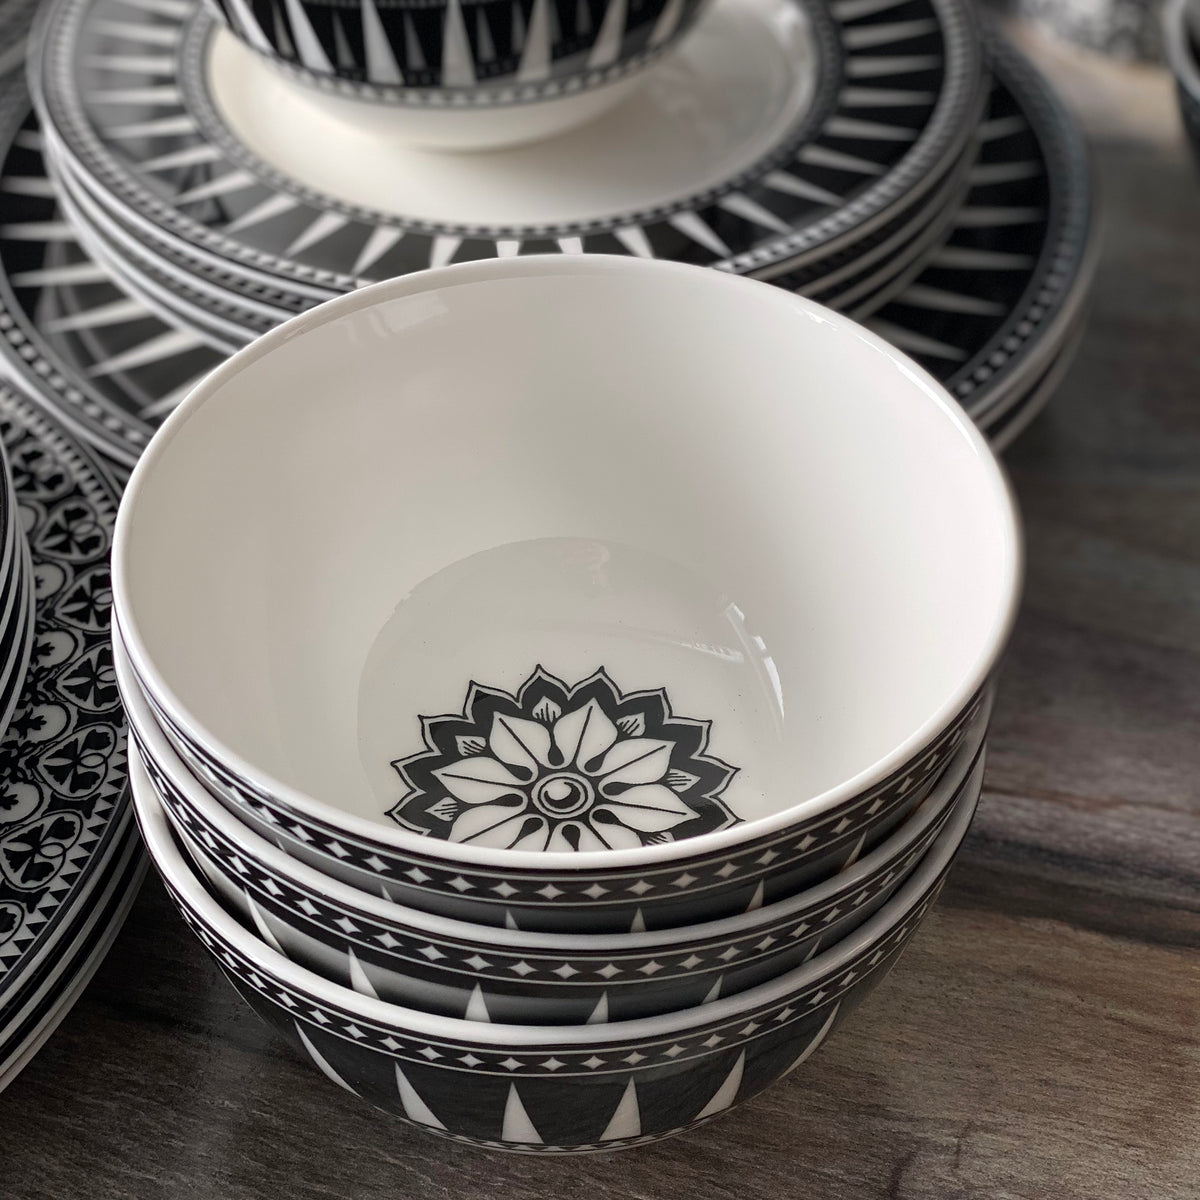 A stack of Marrakech Cereal Bowls by Caskata Artisanal Home, inspired by Art Deco and designed in black and white with geometric patterns. More similarly patterned plates, crafted from high-fired porcelain, are in the background.